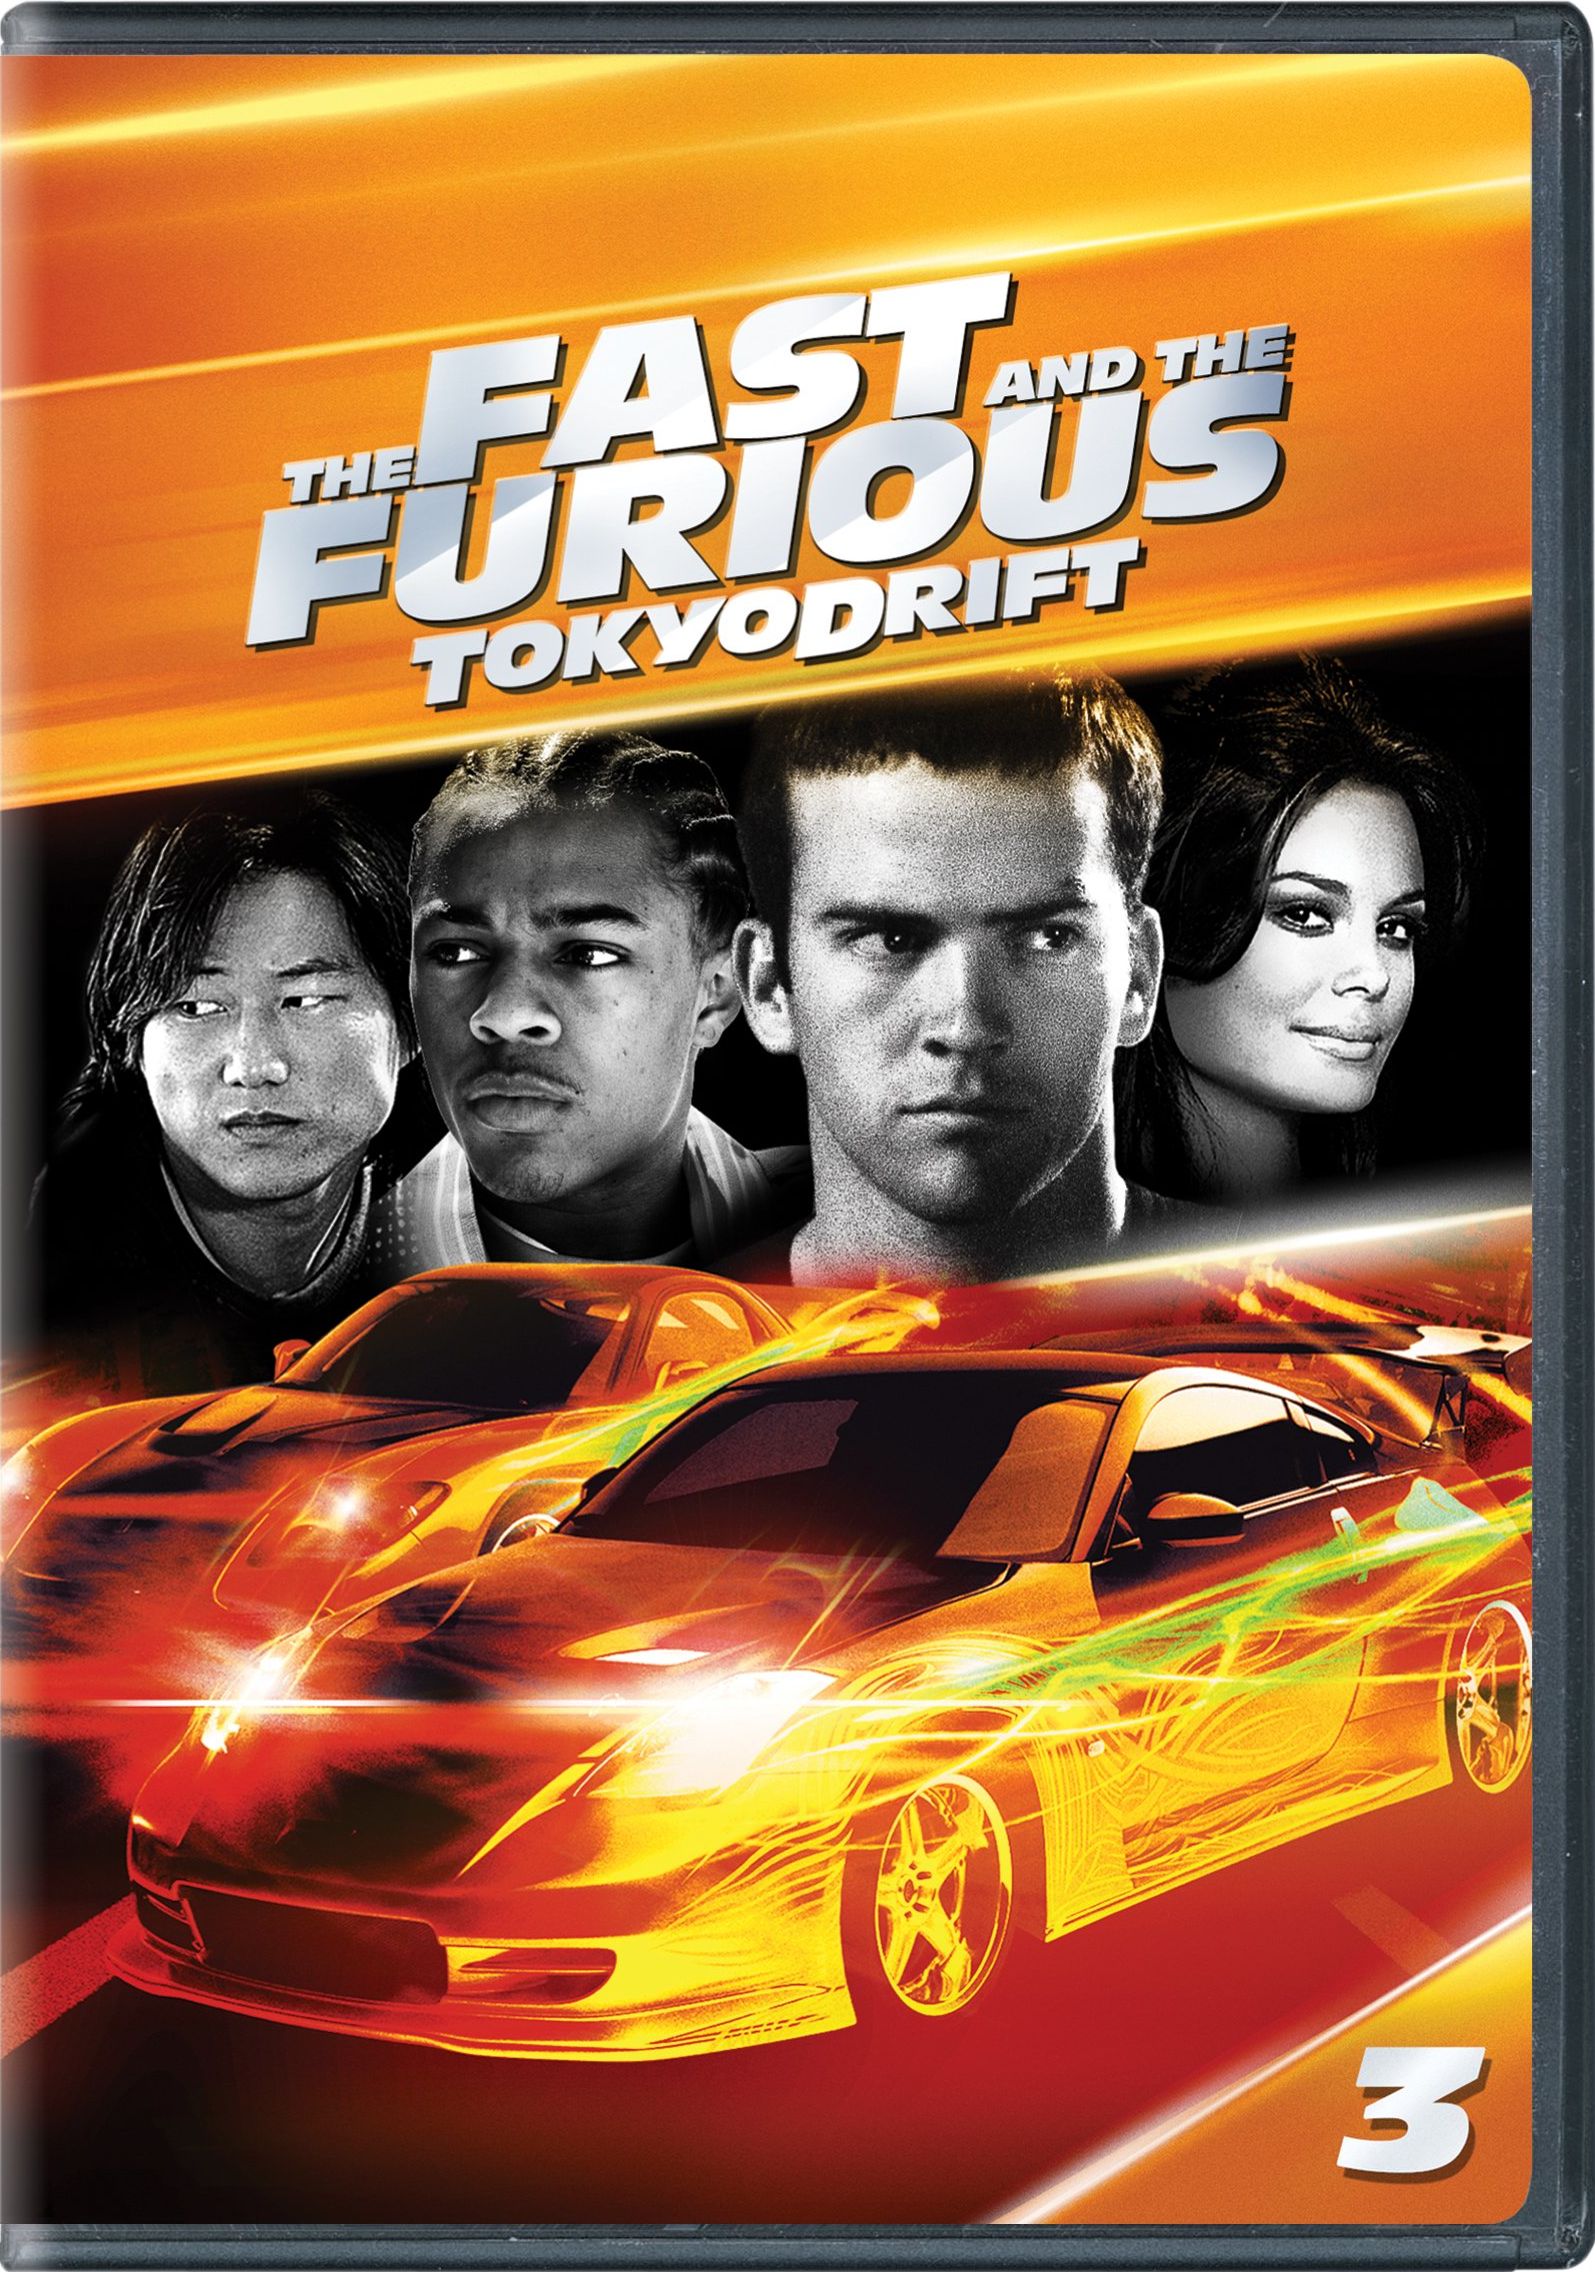 The Fast and the Furious: Tokyo Drift DVD Release Date July 28, 2009